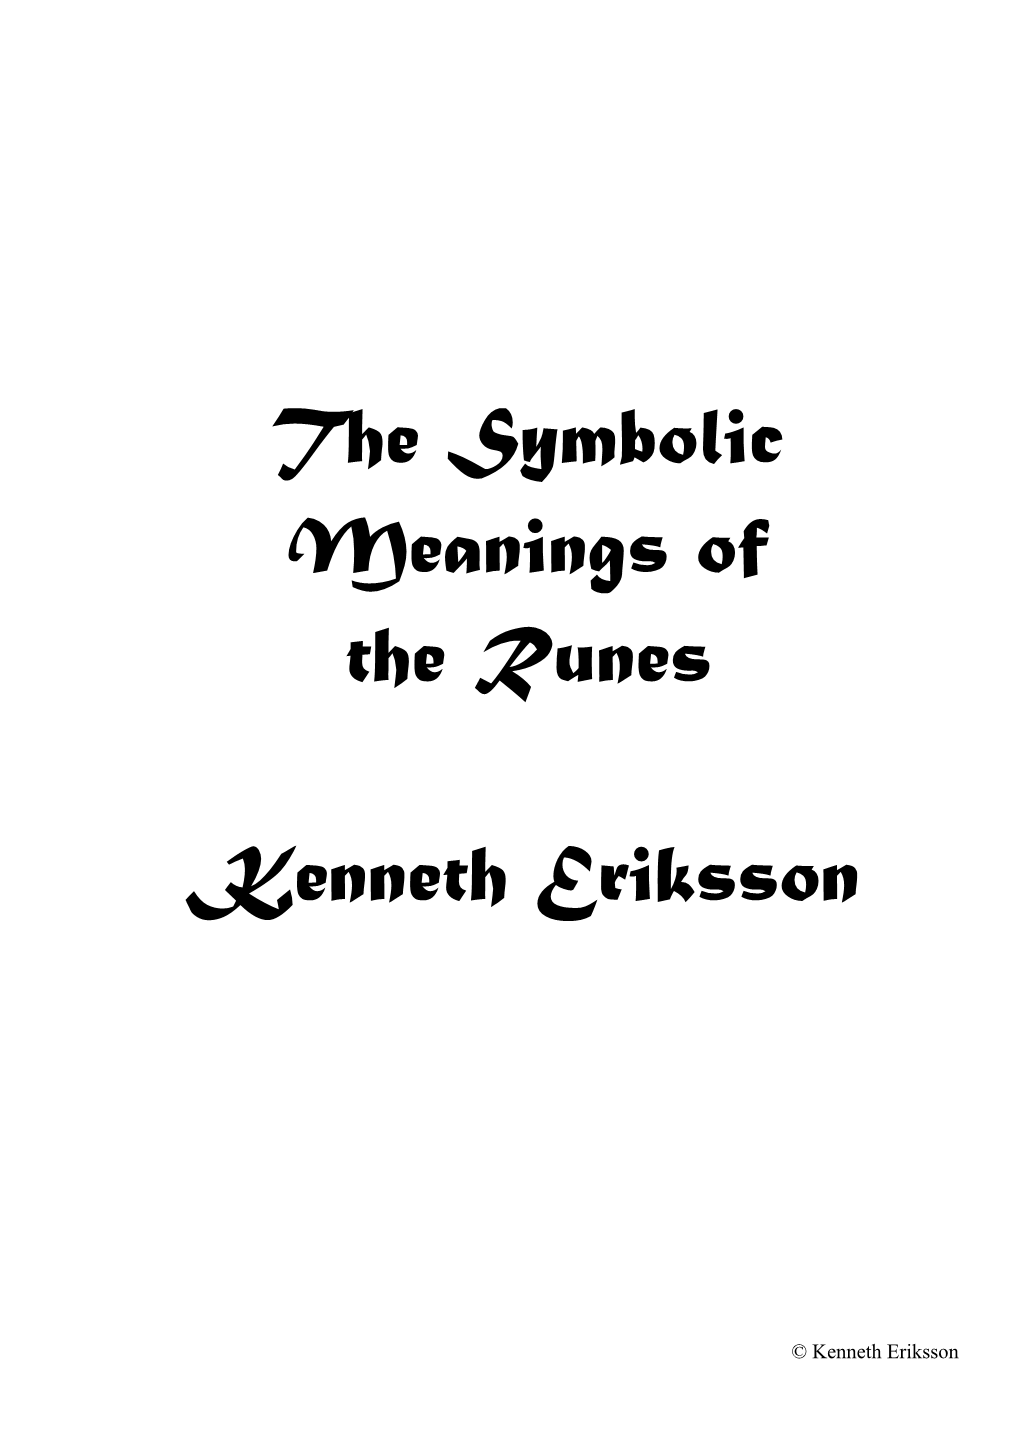 The Symbolic Meanings of the Runes